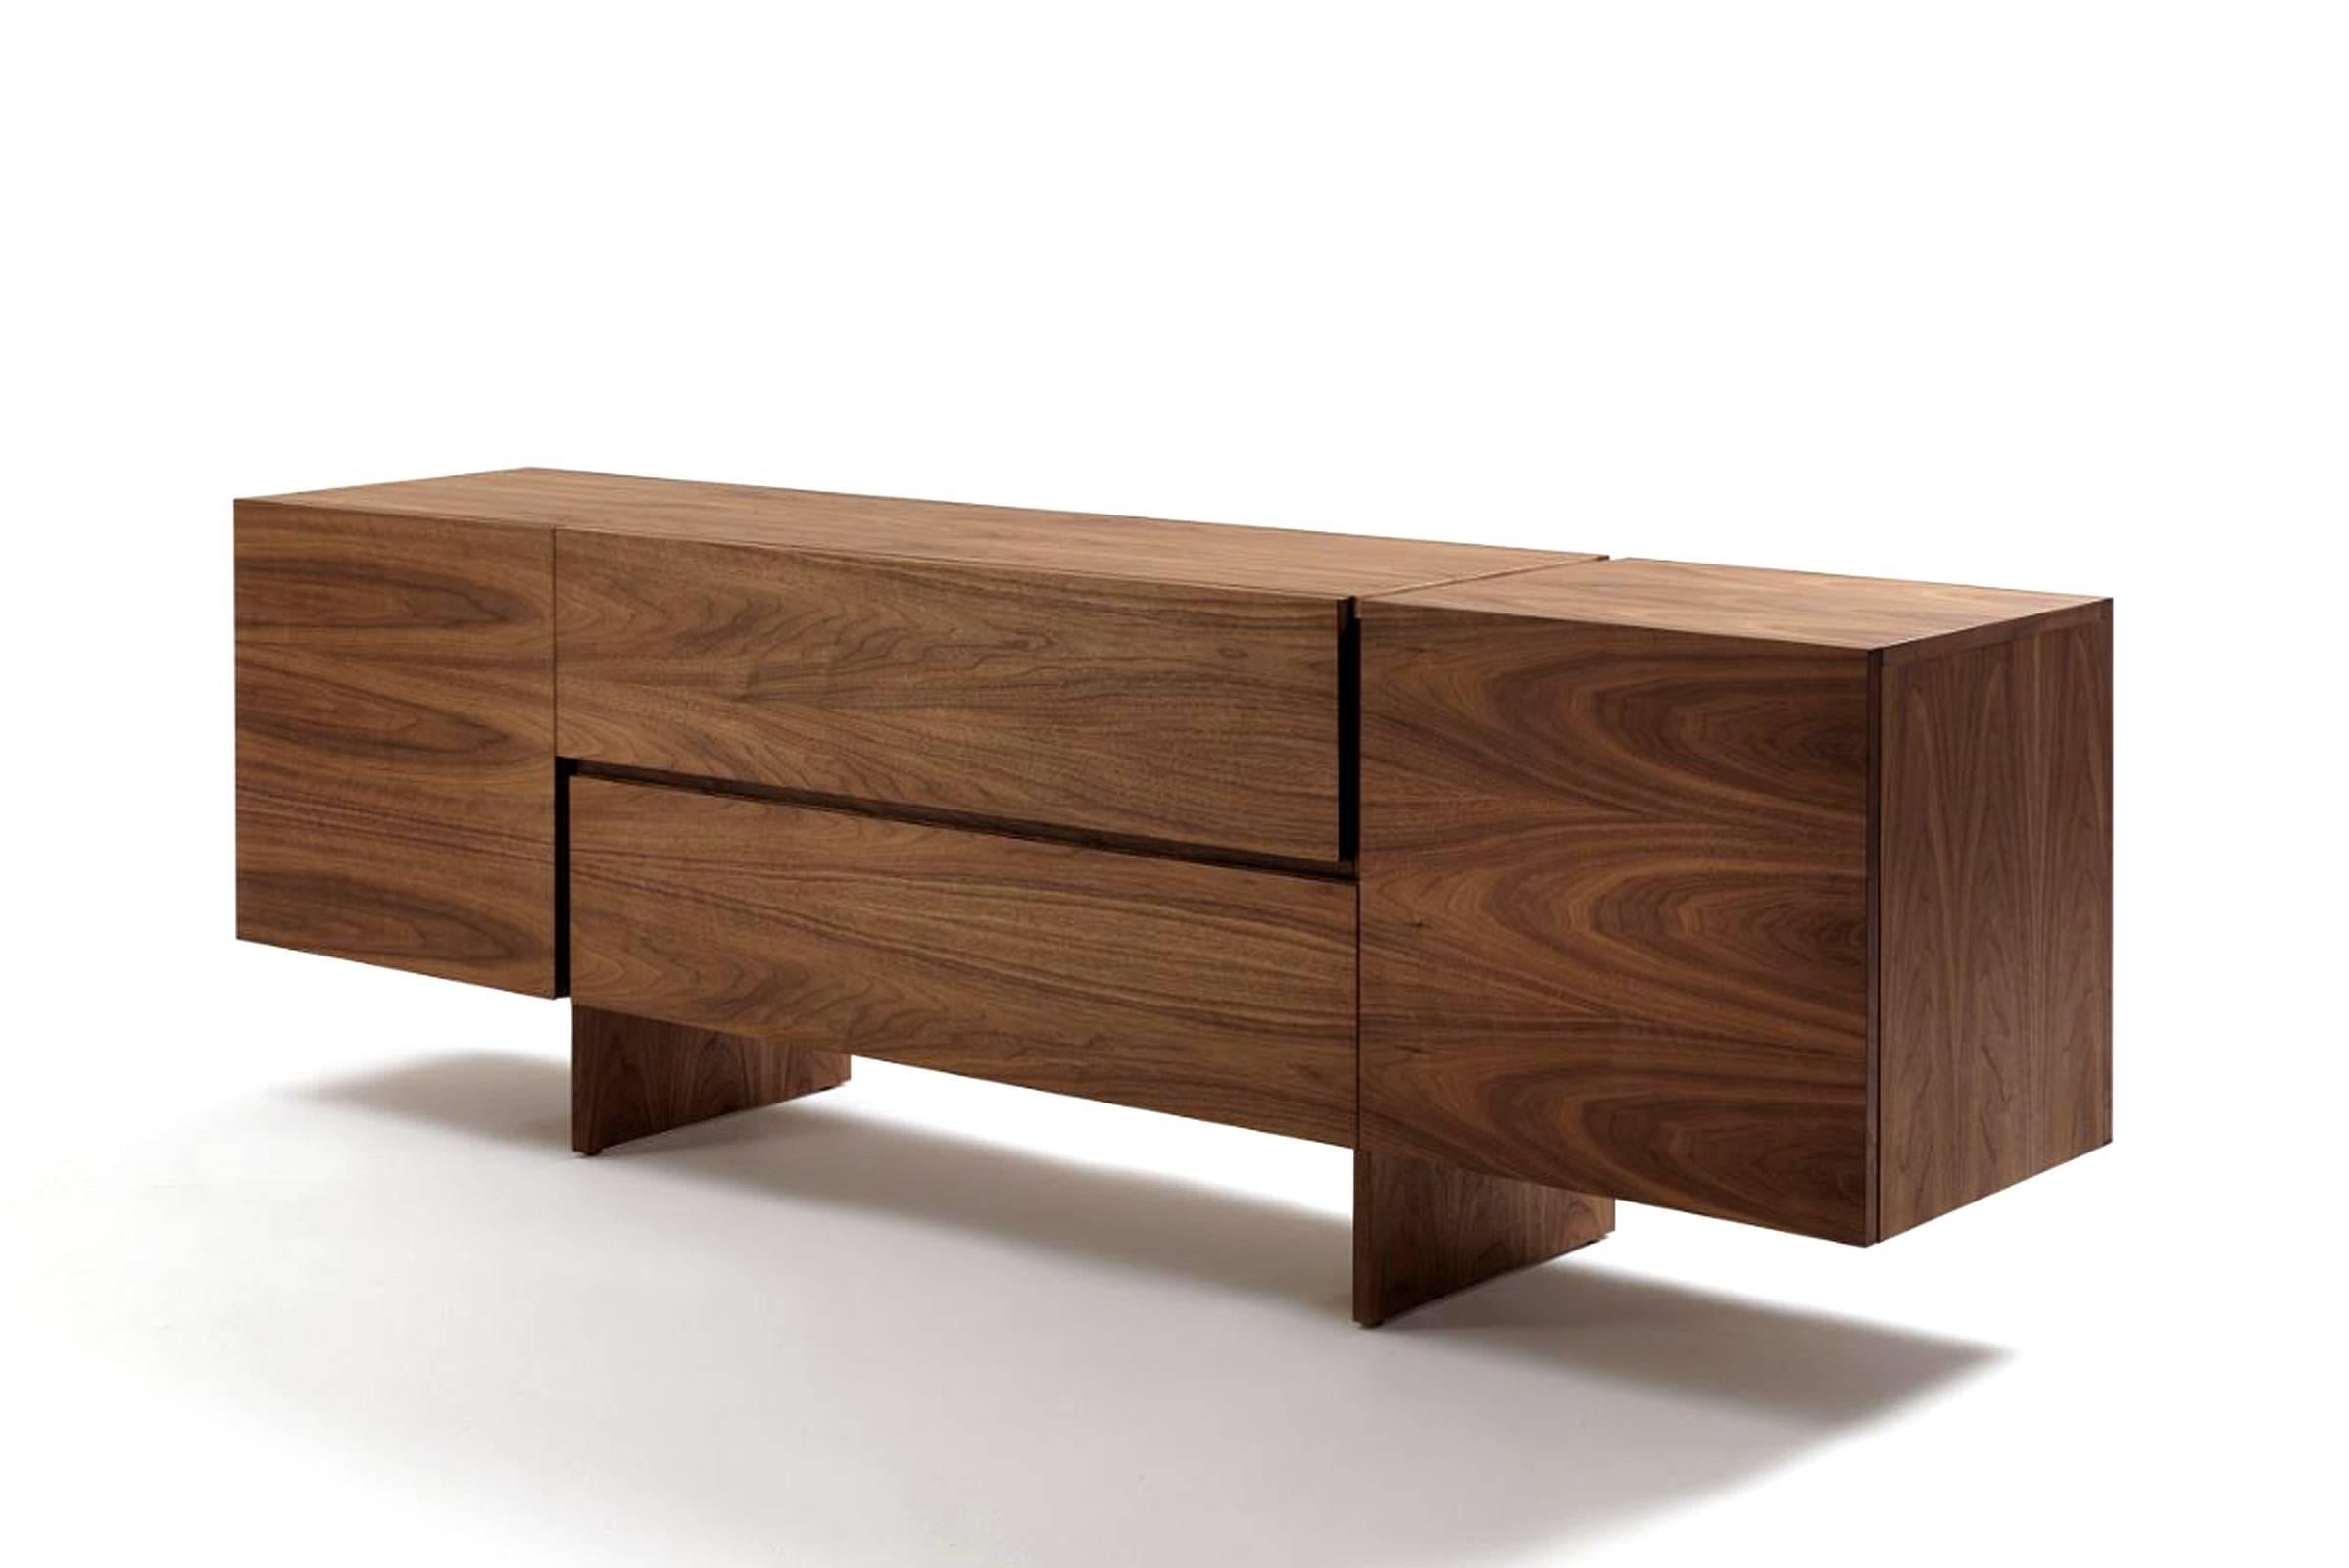 Sideboard multilayer in solid walnut with two central
drawers on metal rails and two side doors, including
2 shelves.
Also available in solid oak, on request.
